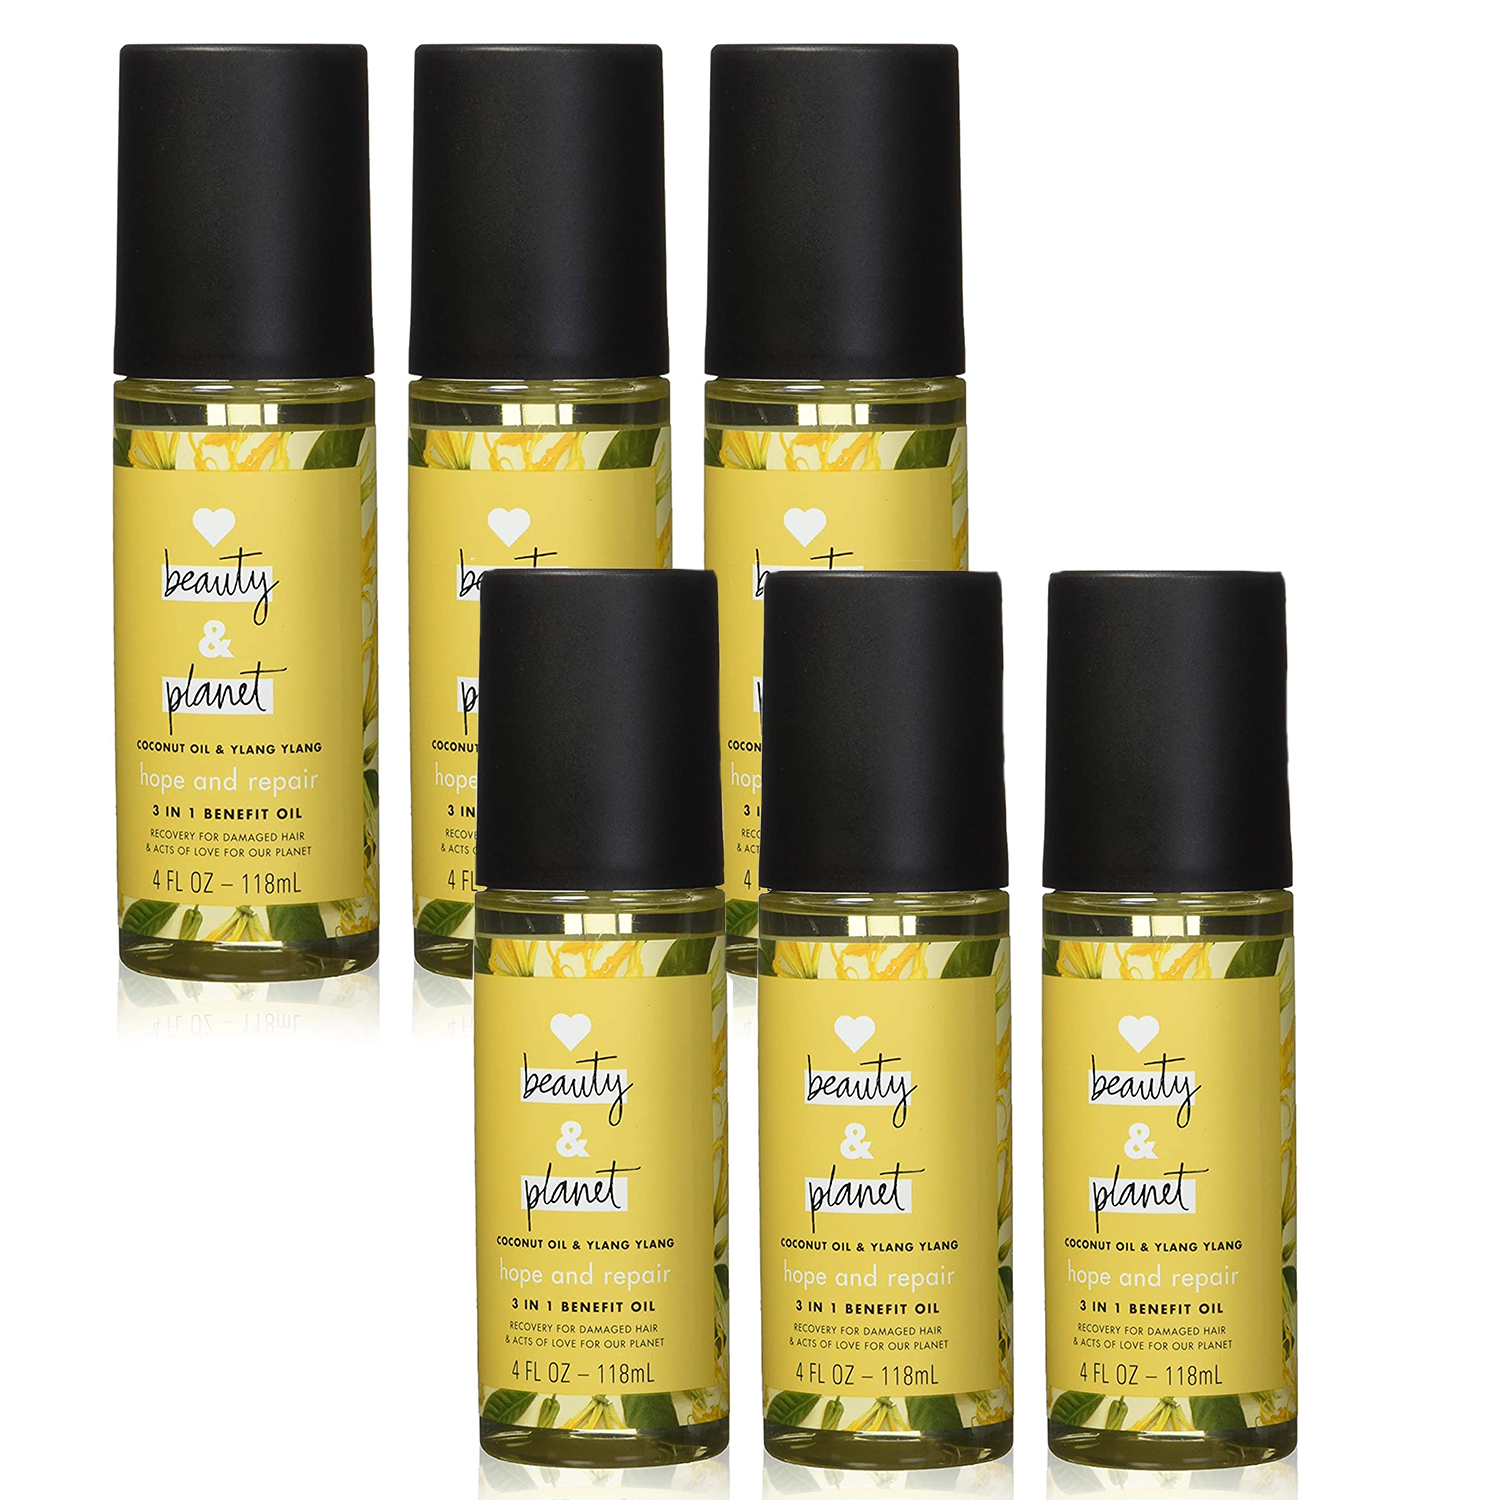 6-New Love Beauty and Planet 3-in-1 Benefit Oil for Unisex Coconut Oil and Ylang